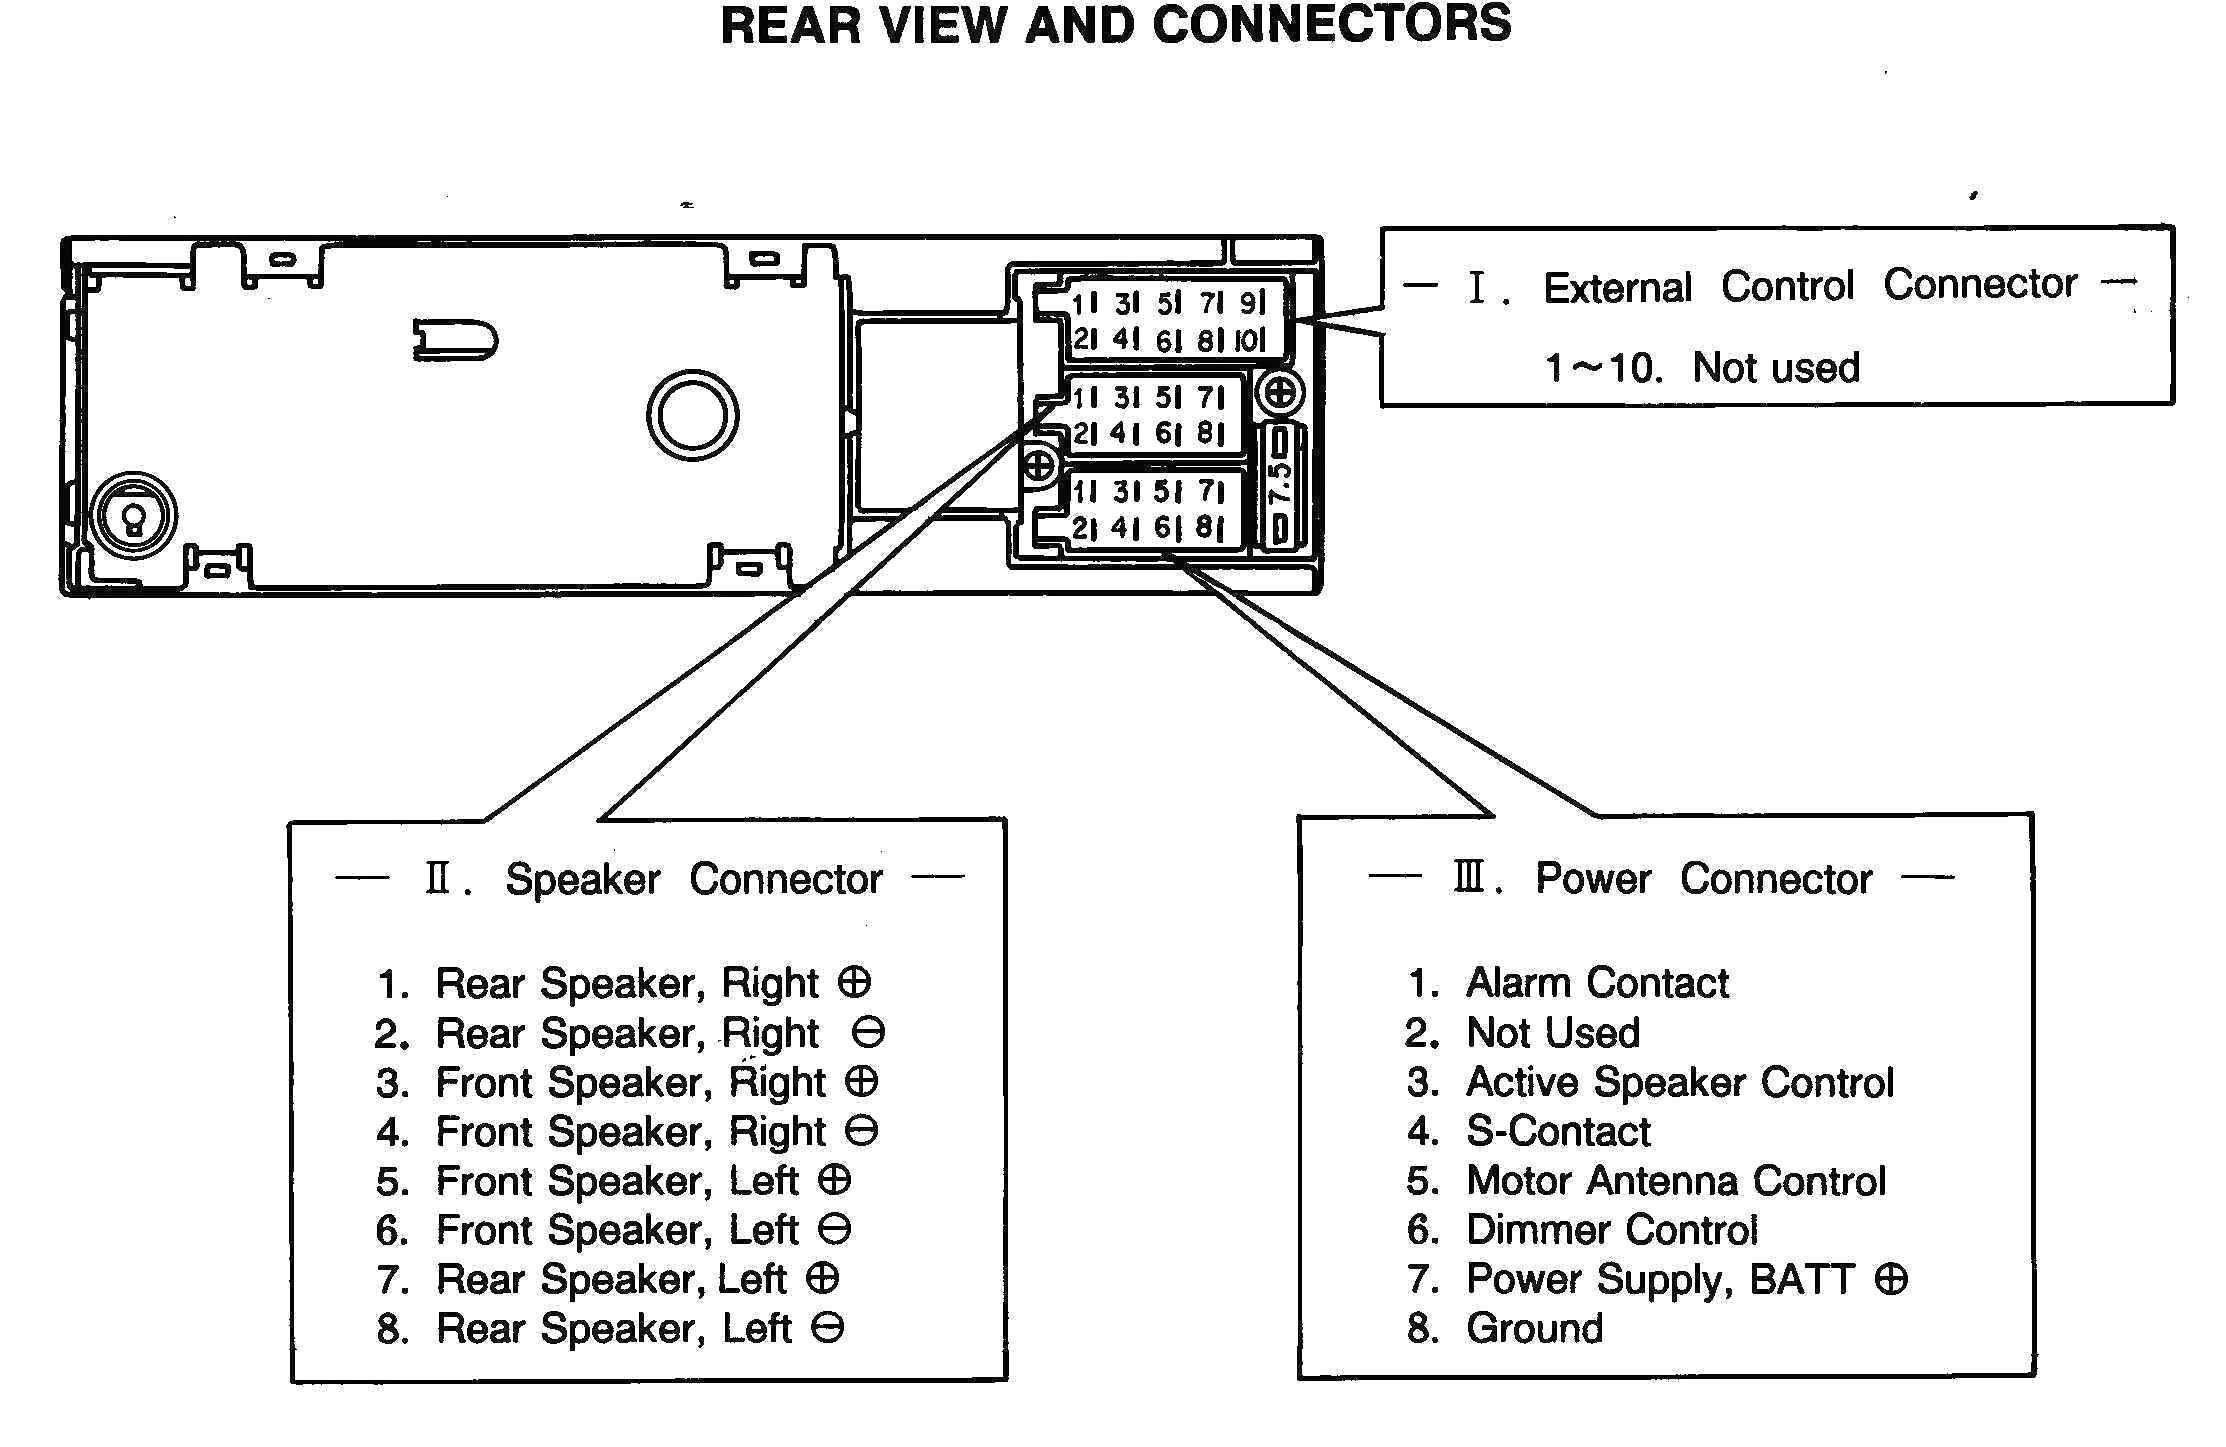 Vw Vr6 Engine Diagram Vw Stereo Wiring Harness Experts Wiring Diagram • Of Vw Vr6 Engine Diagram